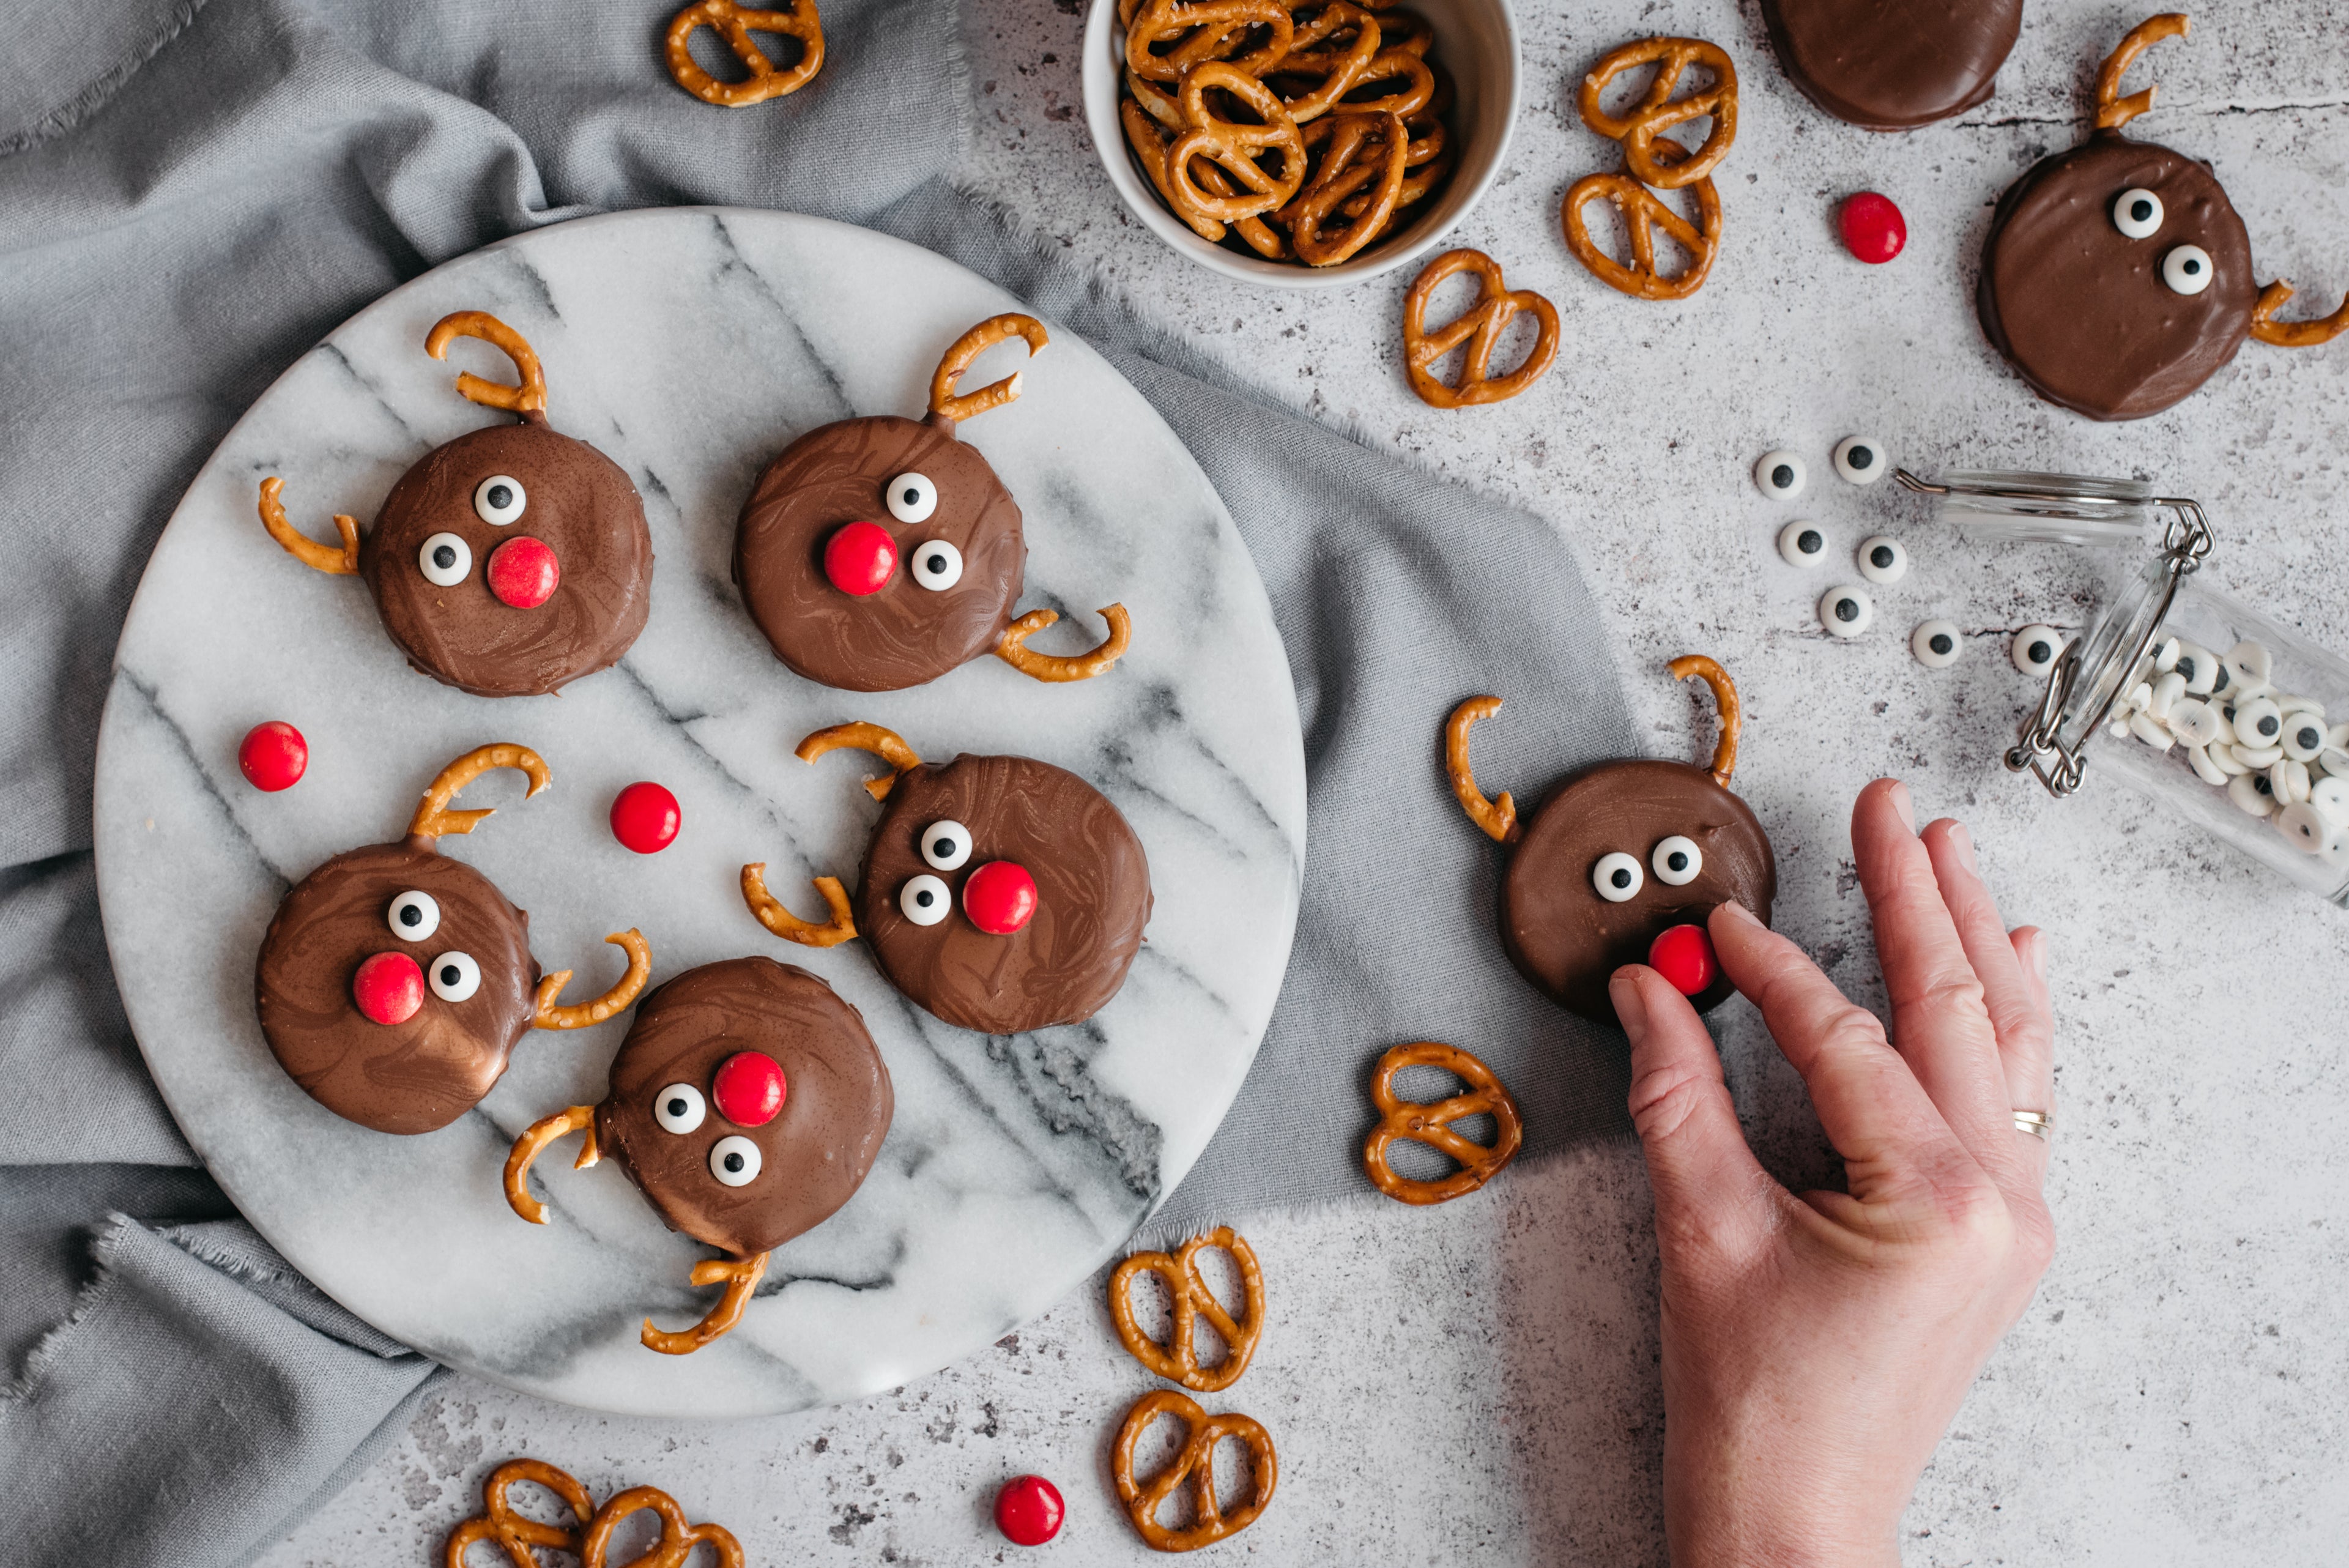 Reindeer Orange Creams being hand decorated with pretzels and red smarties for Rudolph's nose